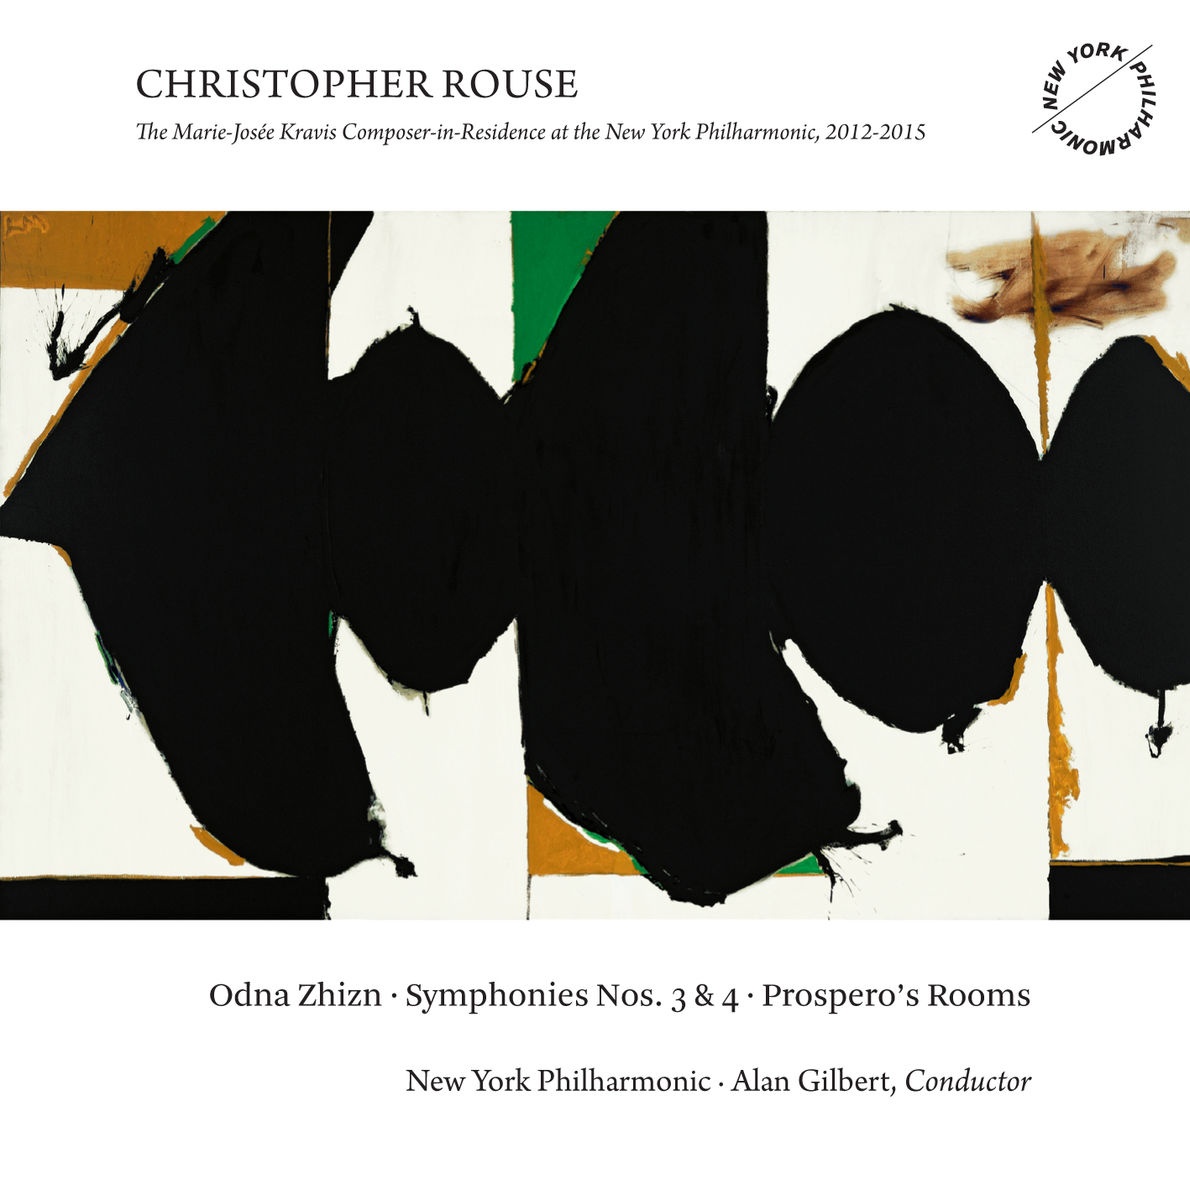 Christopher Rouse: Odna Zhizn, Symphonies Nos. 3 & 4 and Prospero's Rooms